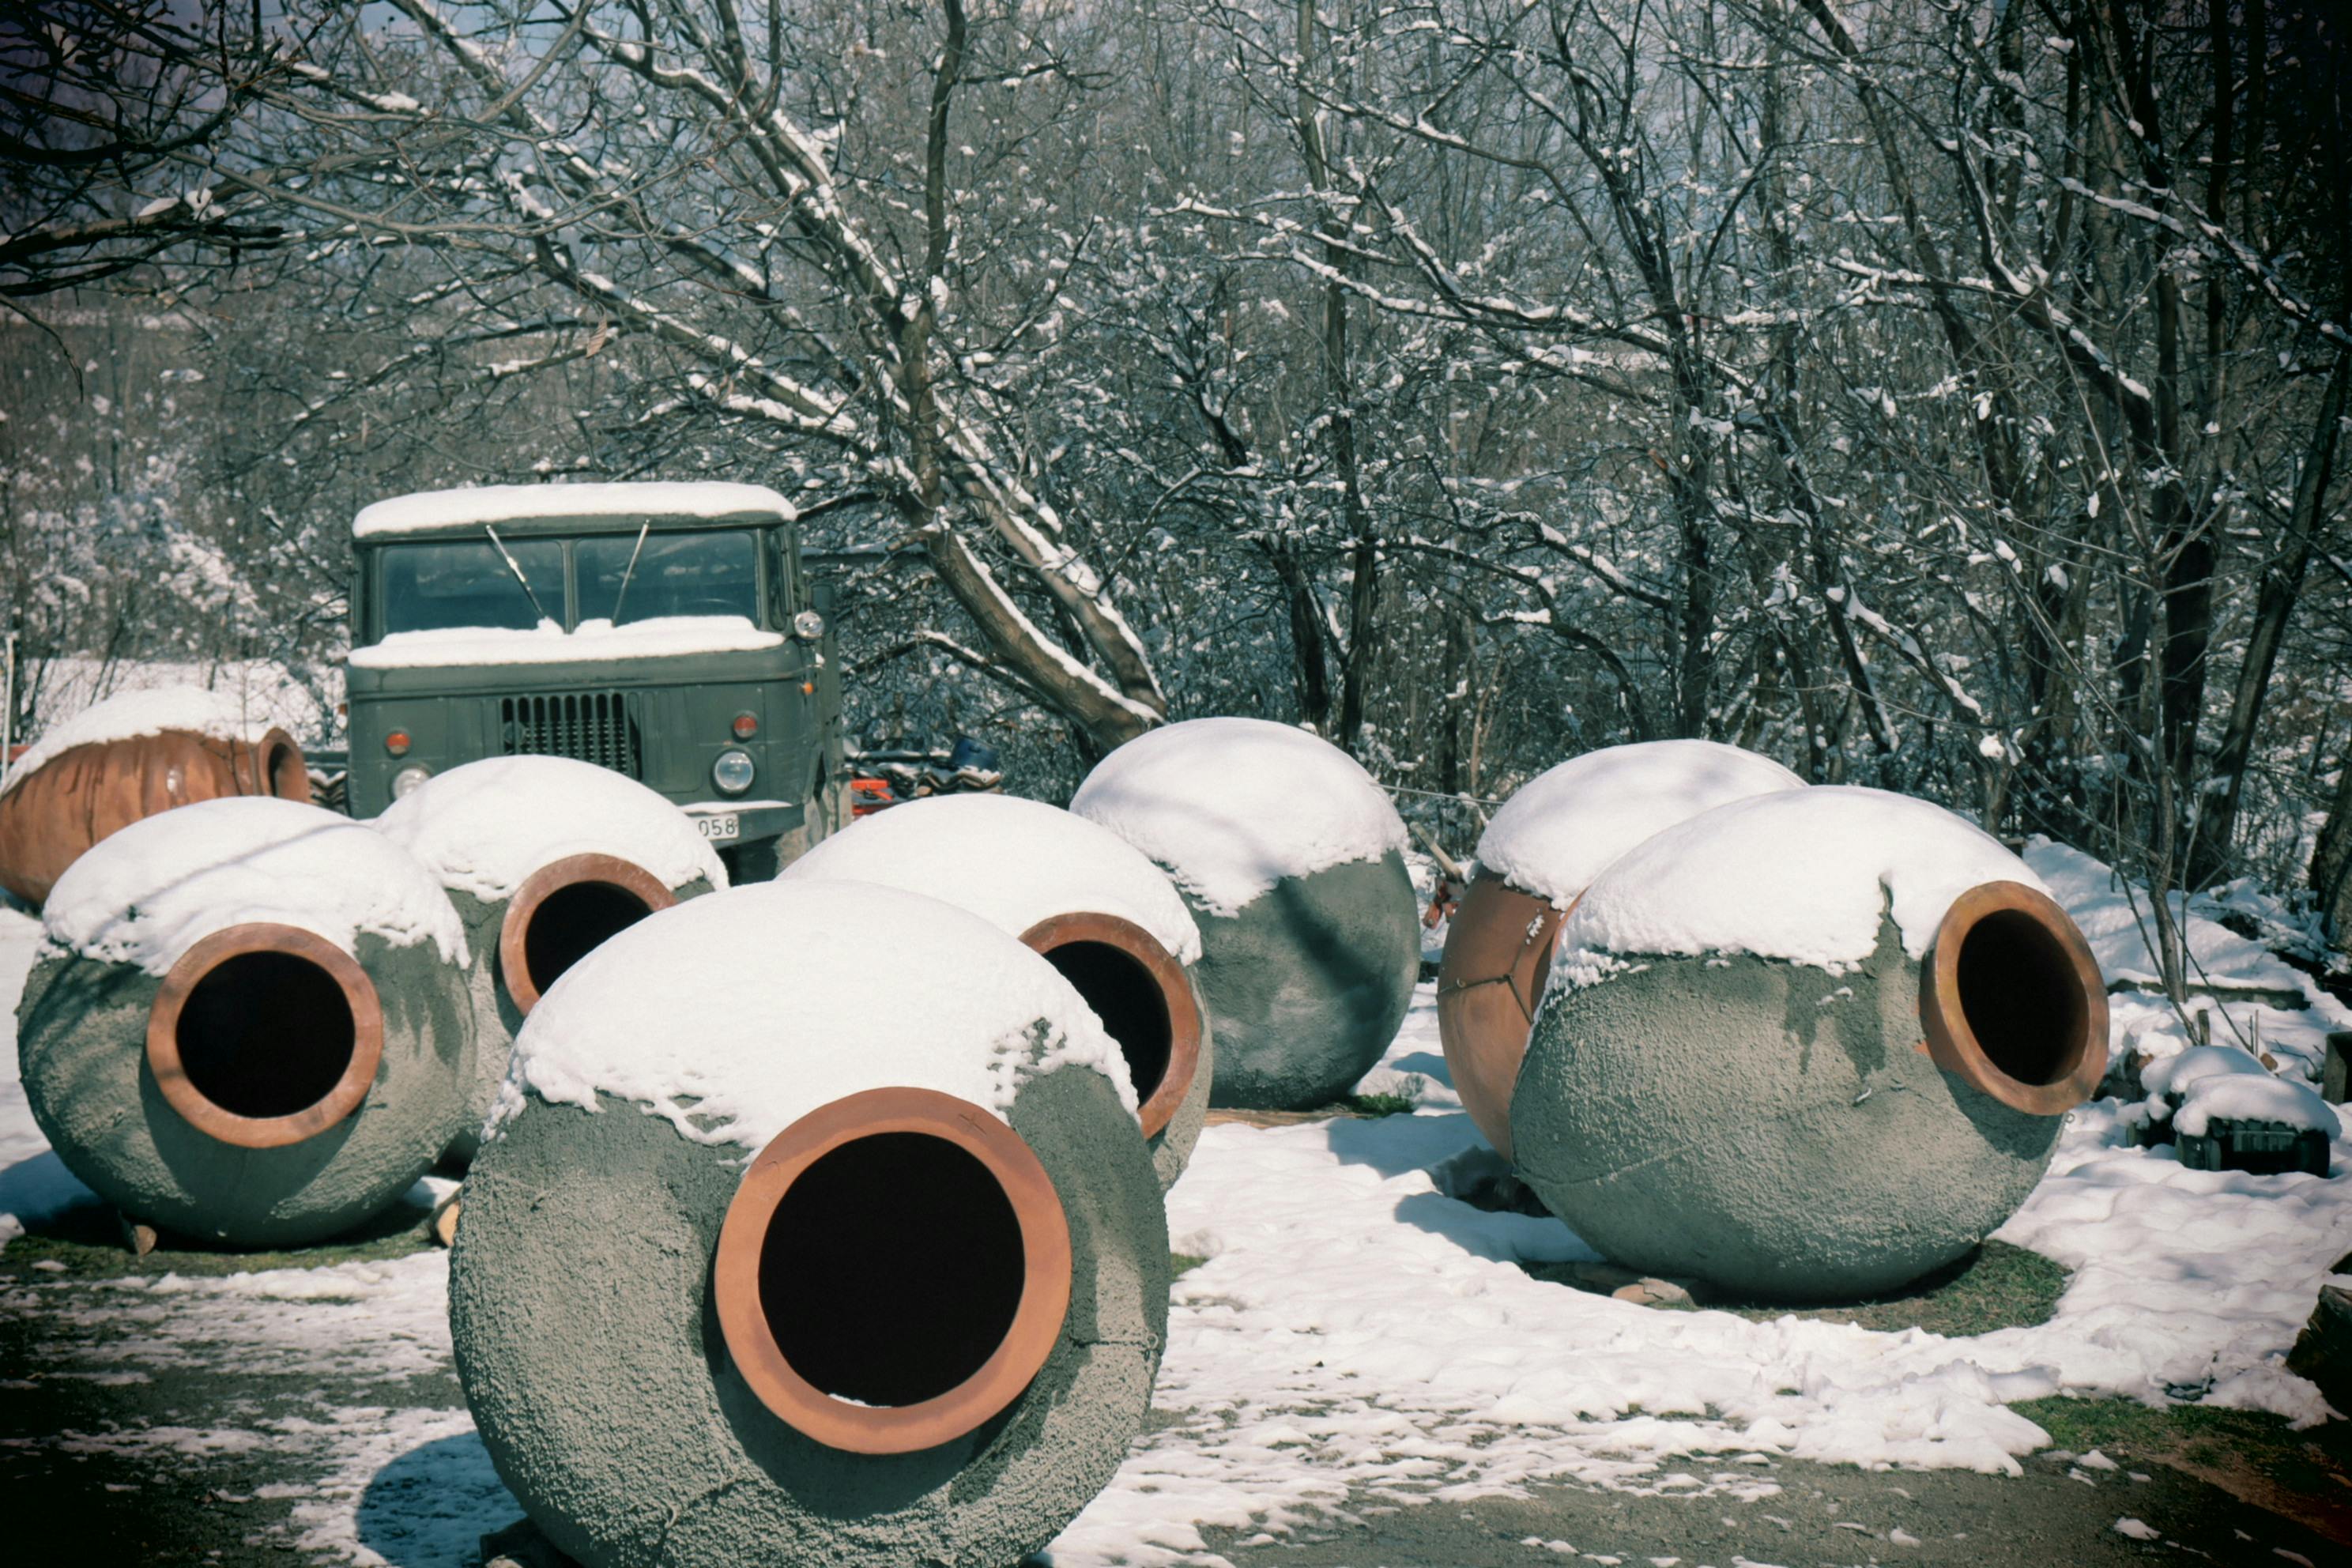 Kvervis are large ceramic vessels which are buried below the ground filled with grapes which are left to ferment to make wine in Georgia photo by Makuna Gotsadze